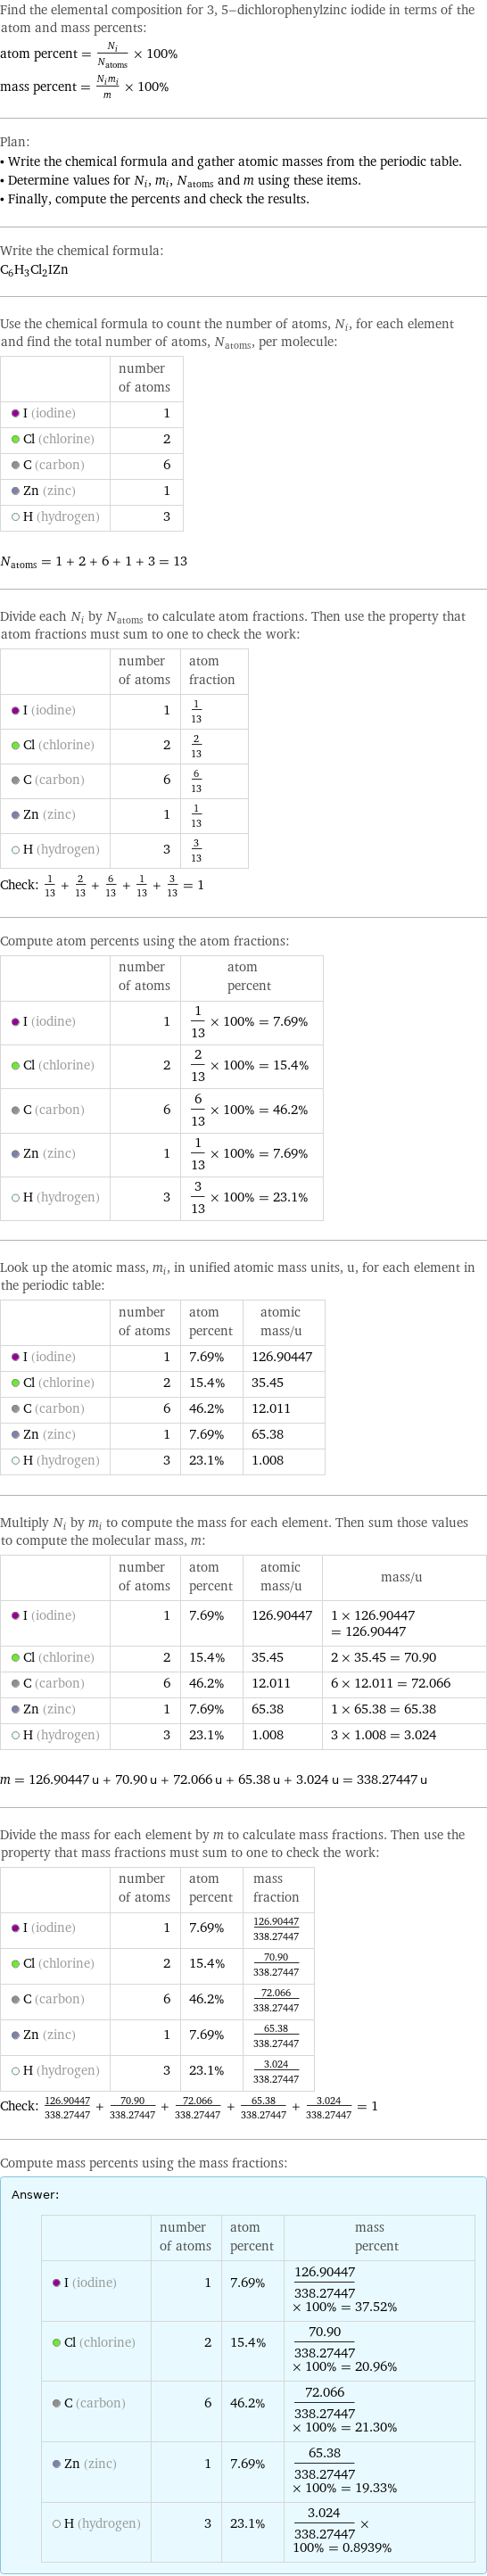 Find the elemental composition for 3, 5-dichlorophenylzinc iodide in terms of the atom and mass percents: atom percent = N_i/N_atoms × 100% mass percent = (N_im_i)/m × 100% Plan: • Write the chemical formula and gather atomic masses from the periodic table. • Determine values for N_i, m_i, N_atoms and m using these items. • Finally, compute the percents and check the results. Write the chemical formula: C_6H_3Cl_2IZn Use the chemical formula to count the number of atoms, N_i, for each element and find the total number of atoms, N_atoms, per molecule:  | number of atoms  I (iodine) | 1  Cl (chlorine) | 2  C (carbon) | 6  Zn (zinc) | 1  H (hydrogen) | 3  N_atoms = 1 + 2 + 6 + 1 + 3 = 13 Divide each N_i by N_atoms to calculate atom fractions. Then use the property that atom fractions must sum to one to check the work:  | number of atoms | atom fraction  I (iodine) | 1 | 1/13  Cl (chlorine) | 2 | 2/13  C (carbon) | 6 | 6/13  Zn (zinc) | 1 | 1/13  H (hydrogen) | 3 | 3/13 Check: 1/13 + 2/13 + 6/13 + 1/13 + 3/13 = 1 Compute atom percents using the atom fractions:  | number of atoms | atom percent  I (iodine) | 1 | 1/13 × 100% = 7.69%  Cl (chlorine) | 2 | 2/13 × 100% = 15.4%  C (carbon) | 6 | 6/13 × 100% = 46.2%  Zn (zinc) | 1 | 1/13 × 100% = 7.69%  H (hydrogen) | 3 | 3/13 × 100% = 23.1% Look up the atomic mass, m_i, in unified atomic mass units, u, for each element in the periodic table:  | number of atoms | atom percent | atomic mass/u  I (iodine) | 1 | 7.69% | 126.90447  Cl (chlorine) | 2 | 15.4% | 35.45  C (carbon) | 6 | 46.2% | 12.011  Zn (zinc) | 1 | 7.69% | 65.38  H (hydrogen) | 3 | 23.1% | 1.008 Multiply N_i by m_i to compute the mass for each element. Then sum those values to compute the molecular mass, m:  | number of atoms | atom percent | atomic mass/u | mass/u  I (iodine) | 1 | 7.69% | 126.90447 | 1 × 126.90447 = 126.90447  Cl (chlorine) | 2 | 15.4% | 35.45 | 2 × 35.45 = 70.90  C (carbon) | 6 | 46.2% | 12.011 | 6 × 12.011 = 72.066  Zn (zinc) | 1 | 7.69% | 65.38 | 1 × 65.38 = 65.38  H (hydrogen) | 3 | 23.1% | 1.008 | 3 × 1.008 = 3.024  m = 126.90447 u + 70.90 u + 72.066 u + 65.38 u + 3.024 u = 338.27447 u Divide the mass for each element by m to calculate mass fractions. Then use the property that mass fractions must sum to one to check the work:  | number of atoms | atom percent | mass fraction  I (iodine) | 1 | 7.69% | 126.90447/338.27447  Cl (chlorine) | 2 | 15.4% | 70.90/338.27447  C (carbon) | 6 | 46.2% | 72.066/338.27447  Zn (zinc) | 1 | 7.69% | 65.38/338.27447  H (hydrogen) | 3 | 23.1% | 3.024/338.27447 Check: 126.90447/338.27447 + 70.90/338.27447 + 72.066/338.27447 + 65.38/338.27447 + 3.024/338.27447 = 1 Compute mass percents using the mass fractions: Answer: |   | | number of atoms | atom percent | mass percent  I (iodine) | 1 | 7.69% | 126.90447/338.27447 × 100% = 37.52%  Cl (chlorine) | 2 | 15.4% | 70.90/338.27447 × 100% = 20.96%  C (carbon) | 6 | 46.2% | 72.066/338.27447 × 100% = 21.30%  Zn (zinc) | 1 | 7.69% | 65.38/338.27447 × 100% = 19.33%  H (hydrogen) | 3 | 23.1% | 3.024/338.27447 × 100% = 0.8939%